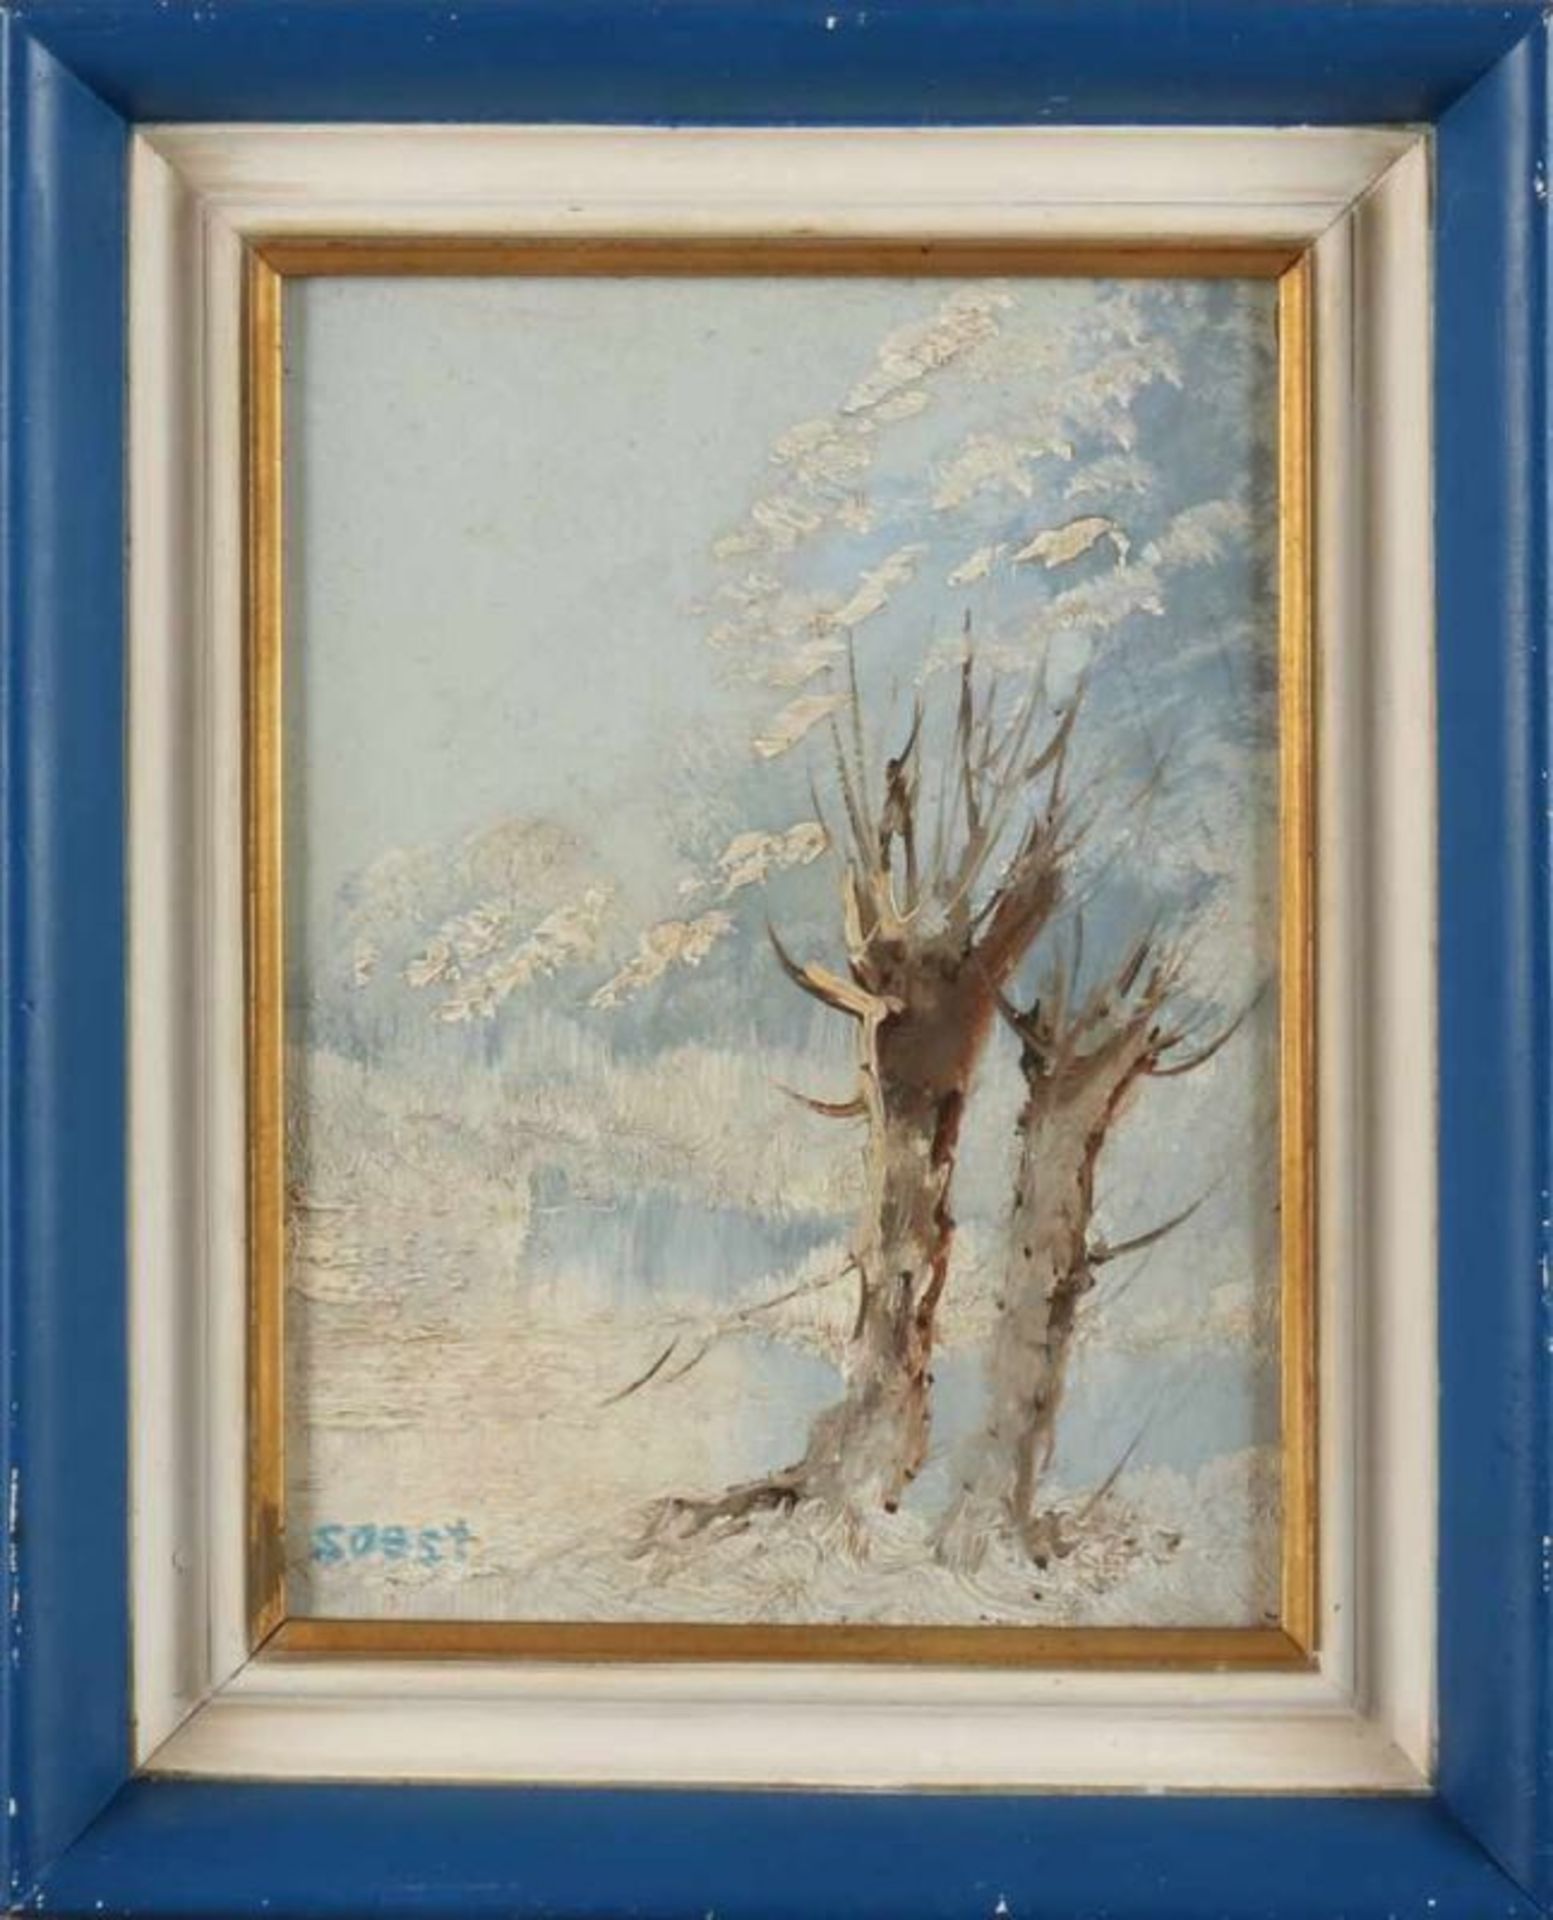 Soest. 20th century. Winter landscape with willows. Oil paint on panel. Size: 24 x H, B 18 cm. In